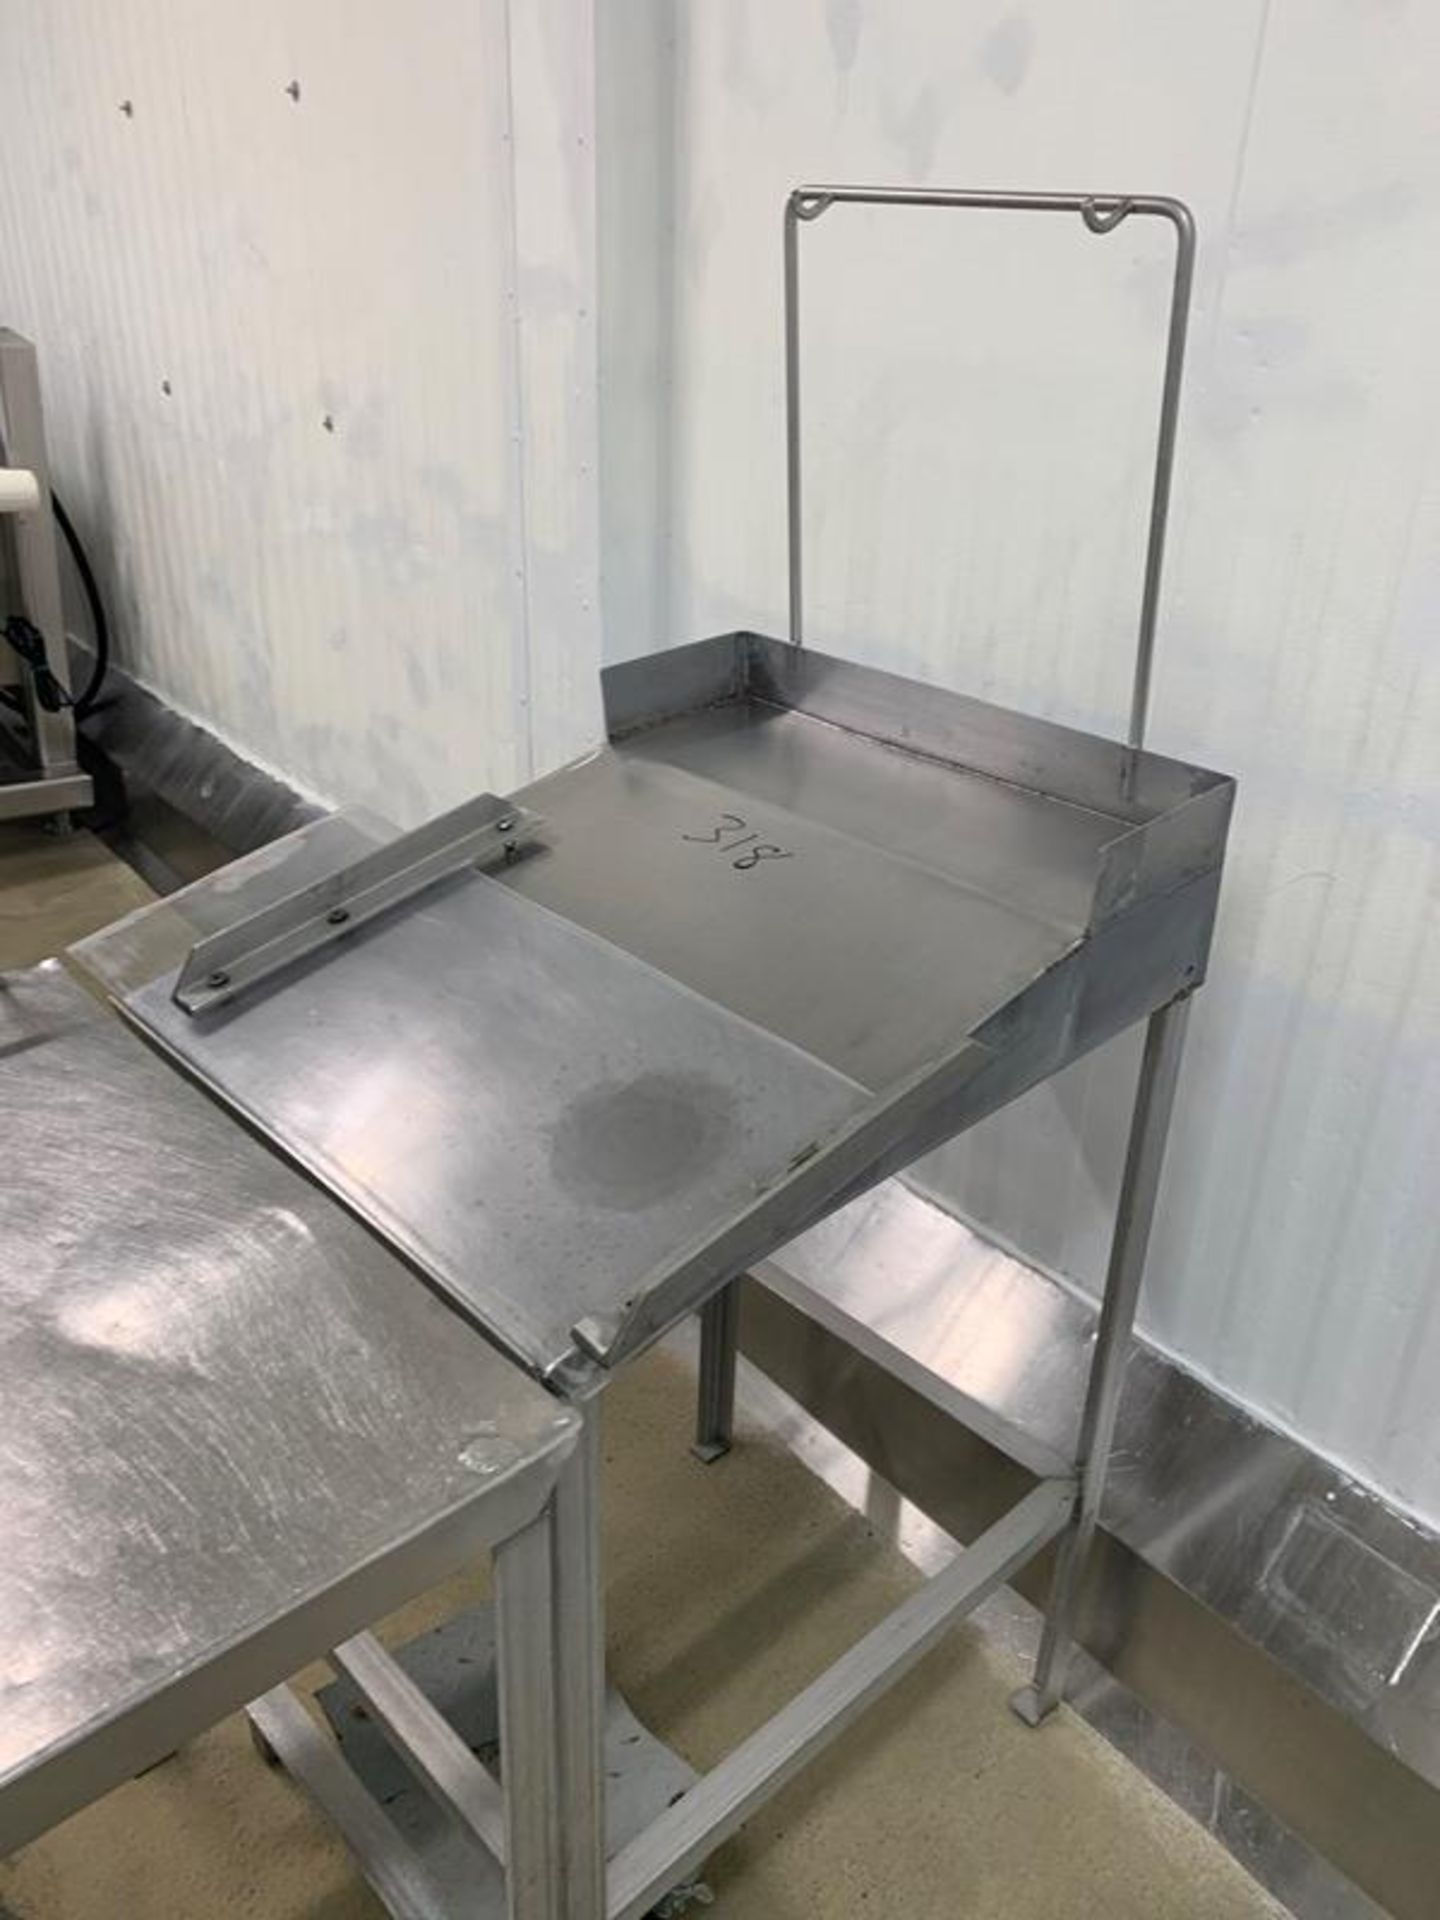 Lot Table (1) 30" W X 5' L X 36" H, (1) Foreman's Desk, (3) Stainless Steel Racks (Located in Mt. - Image 2 of 4